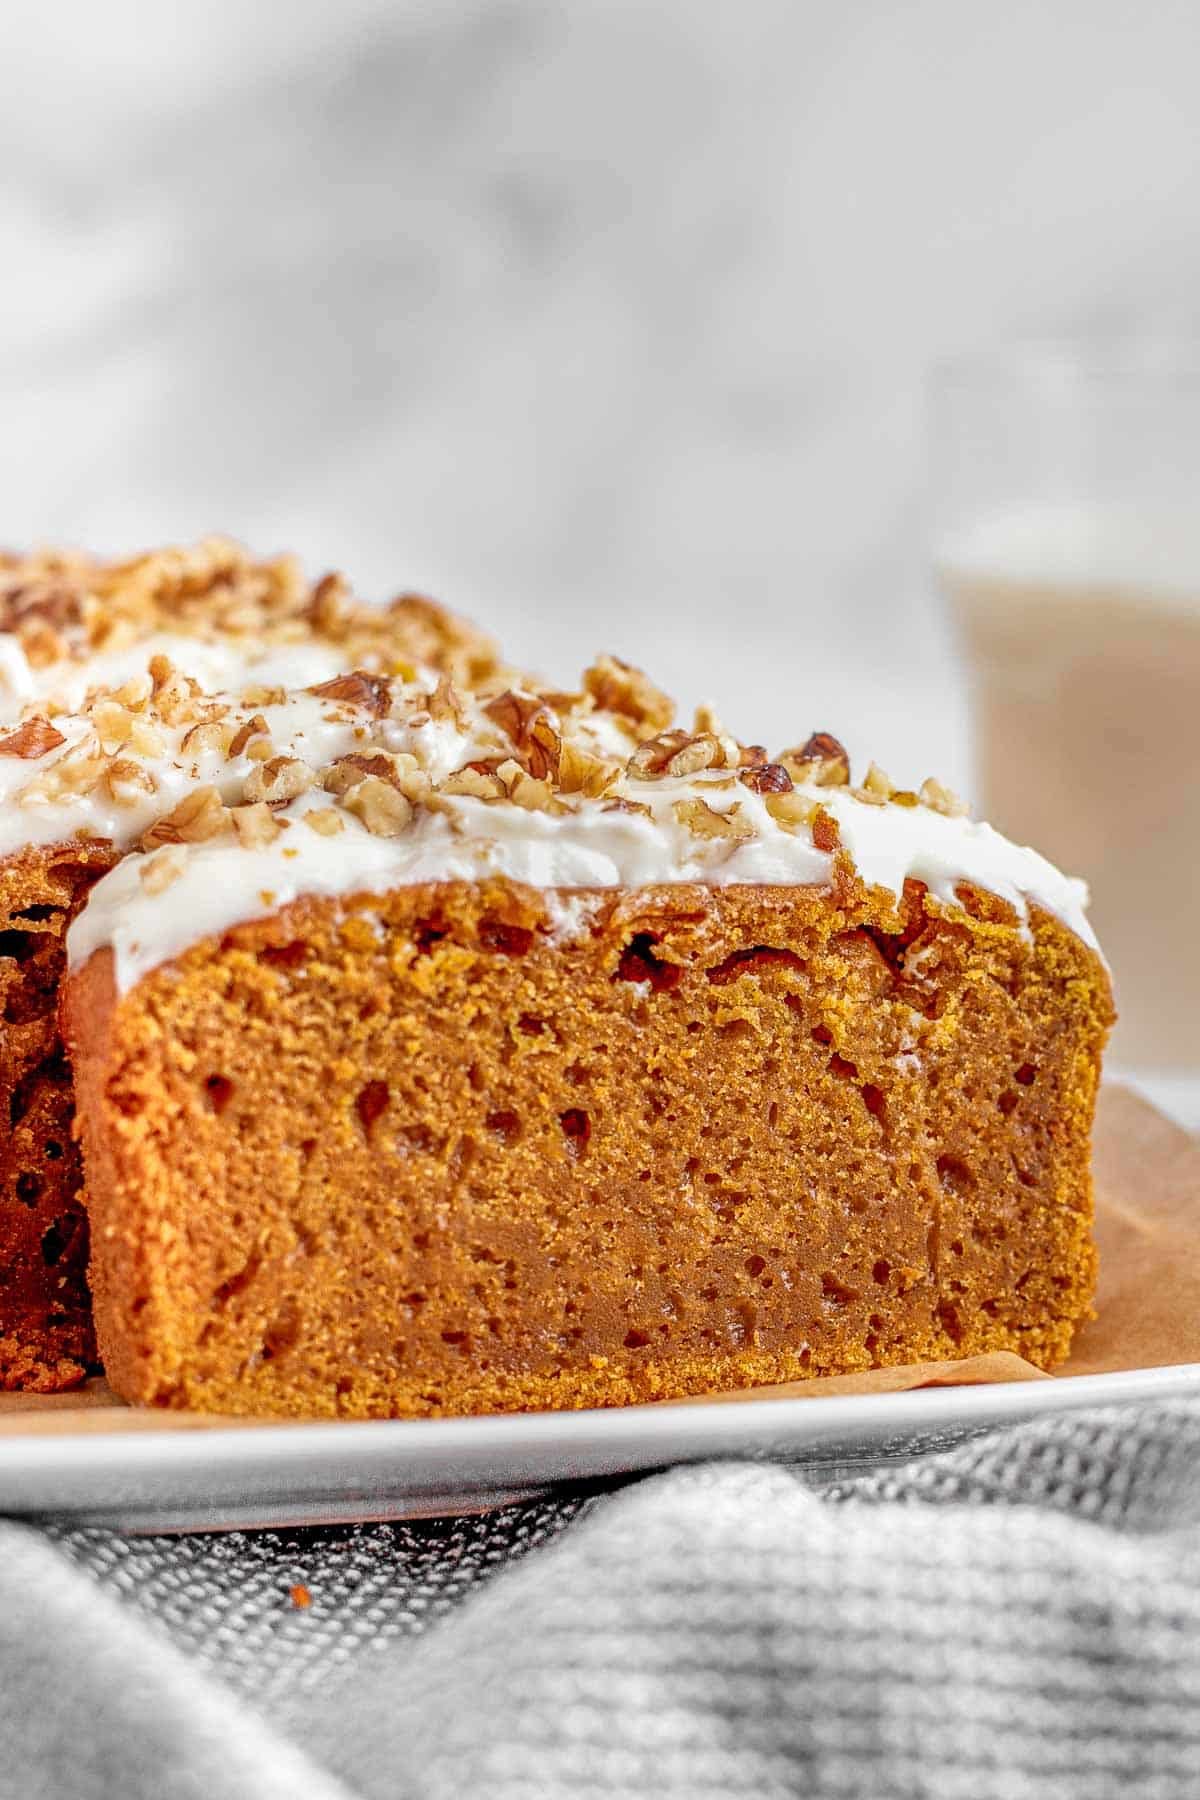 A slice of pumpkin bread with icing on a plate.